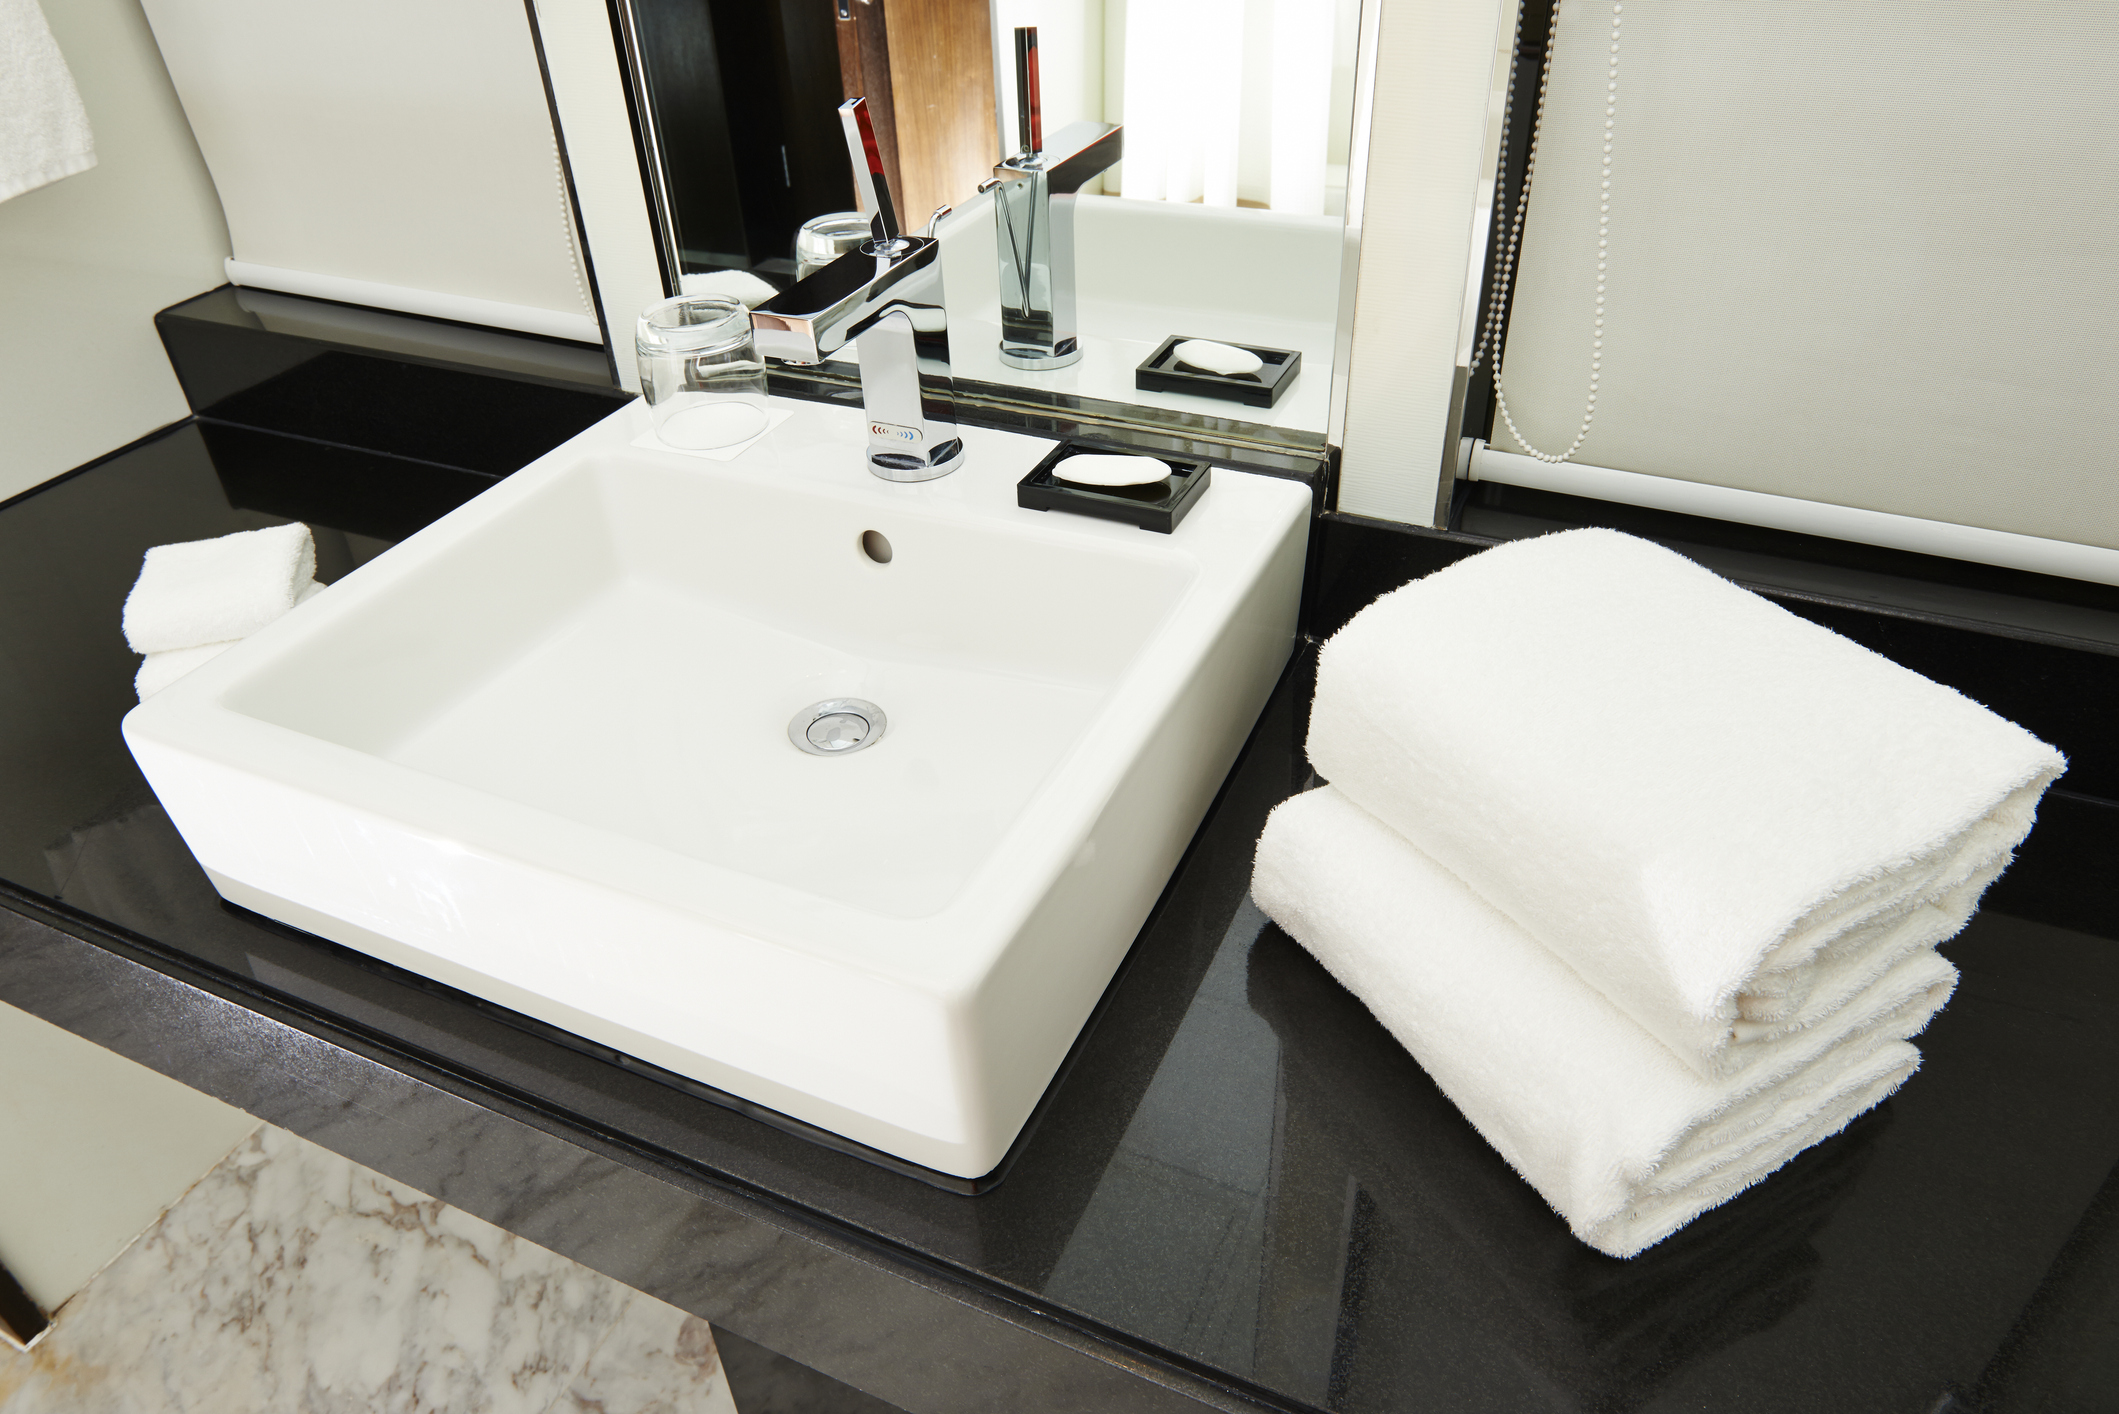 A luxury bathroom with ceramic wash basin and chrome faucet.